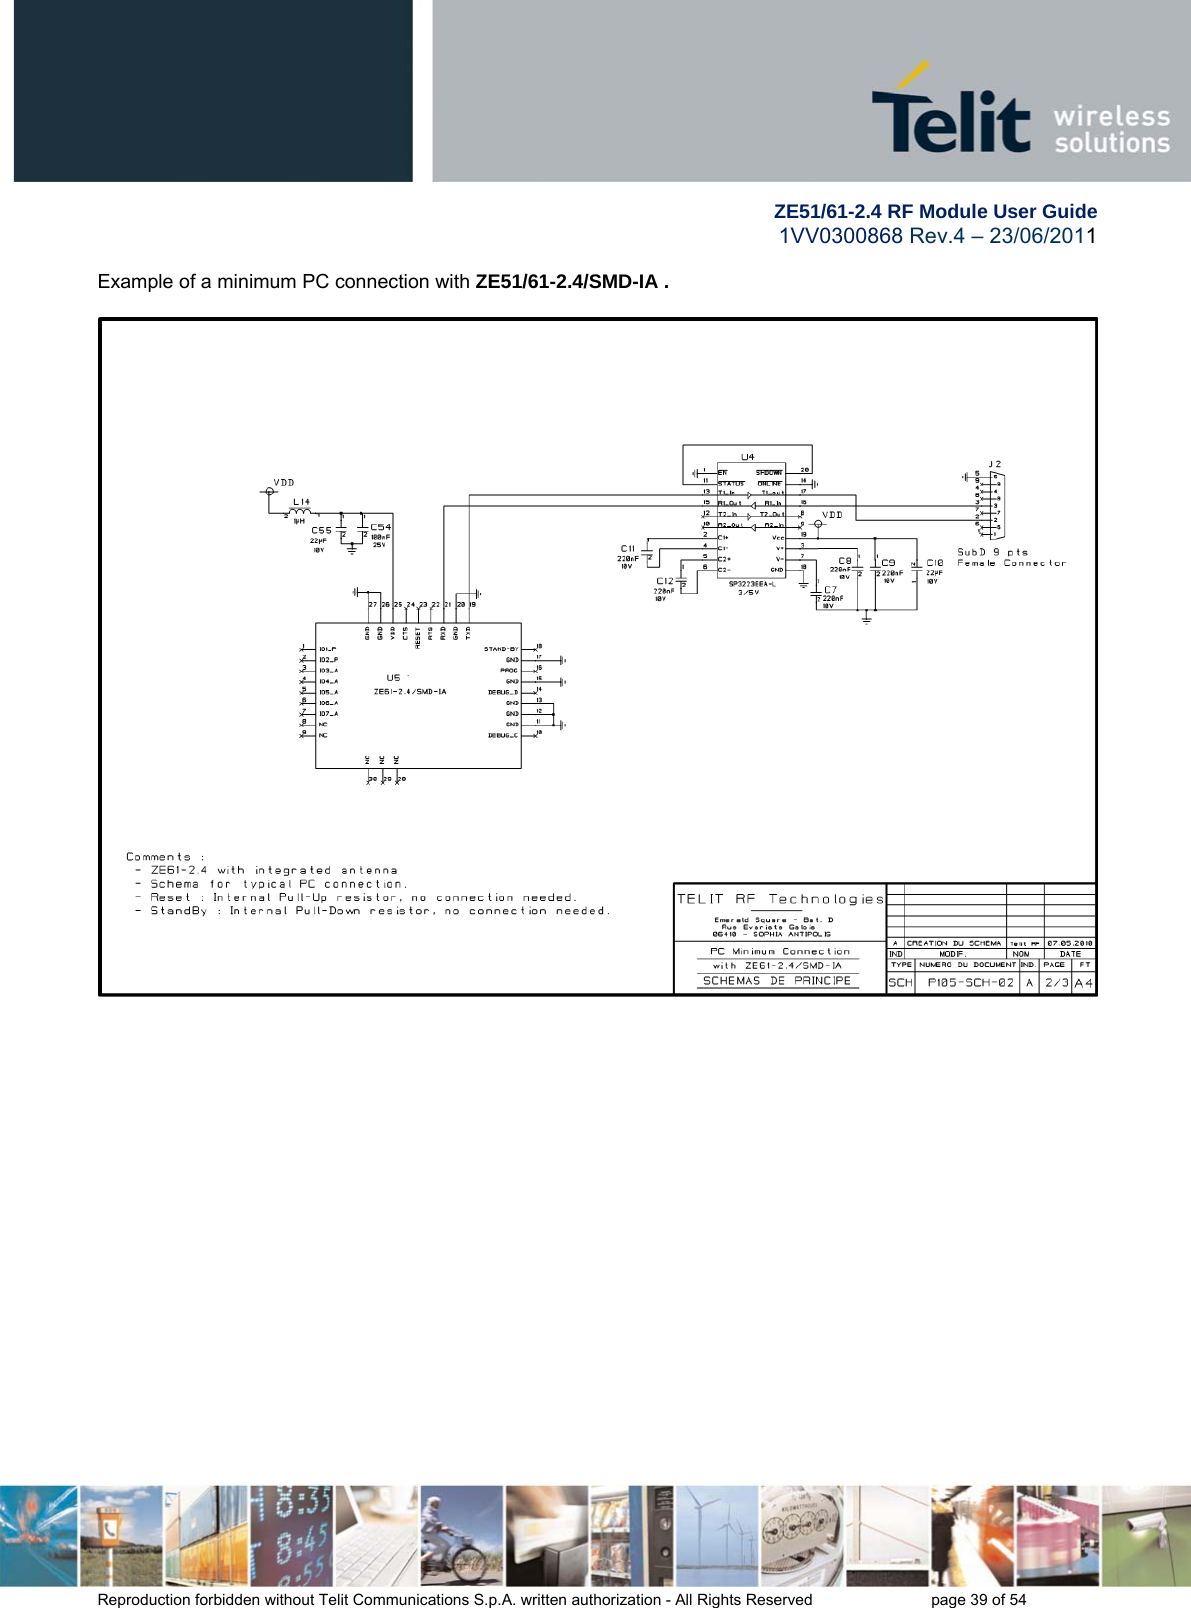        ZE51/61-2.4 RF Module User Guide 1VV0300868 Rev.4 – 23/06/2011 Reproduction forbidden without Telit Communications S.p.A. written authorization - All Rights Reserved    page 39 of 54  Example of a minimum PC connection with ZE51/61-2.4/SMD-IA .    